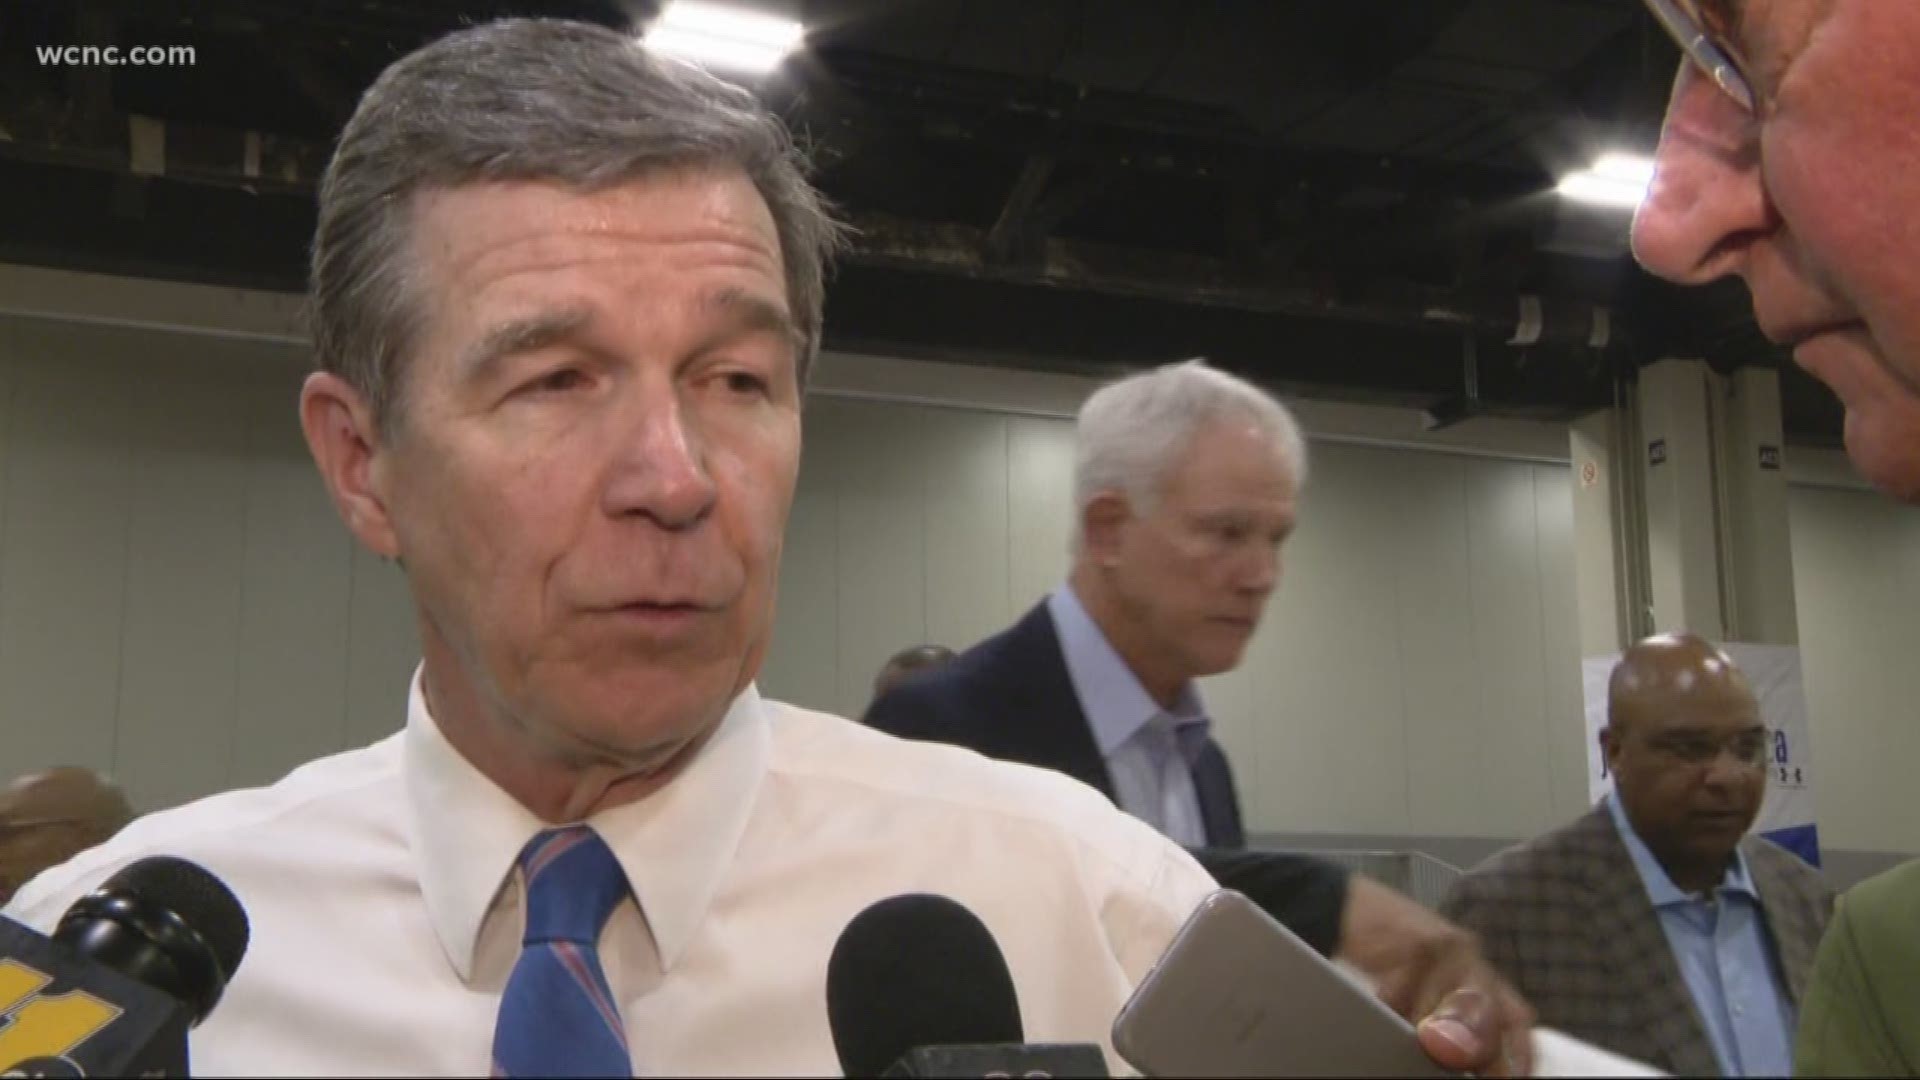 While in town for All-Star Weekend, Governor Roy Cooper came to the Charlotte Convention Center to watch some of NBA's stars give back to kids, and spoke on a number of topics.